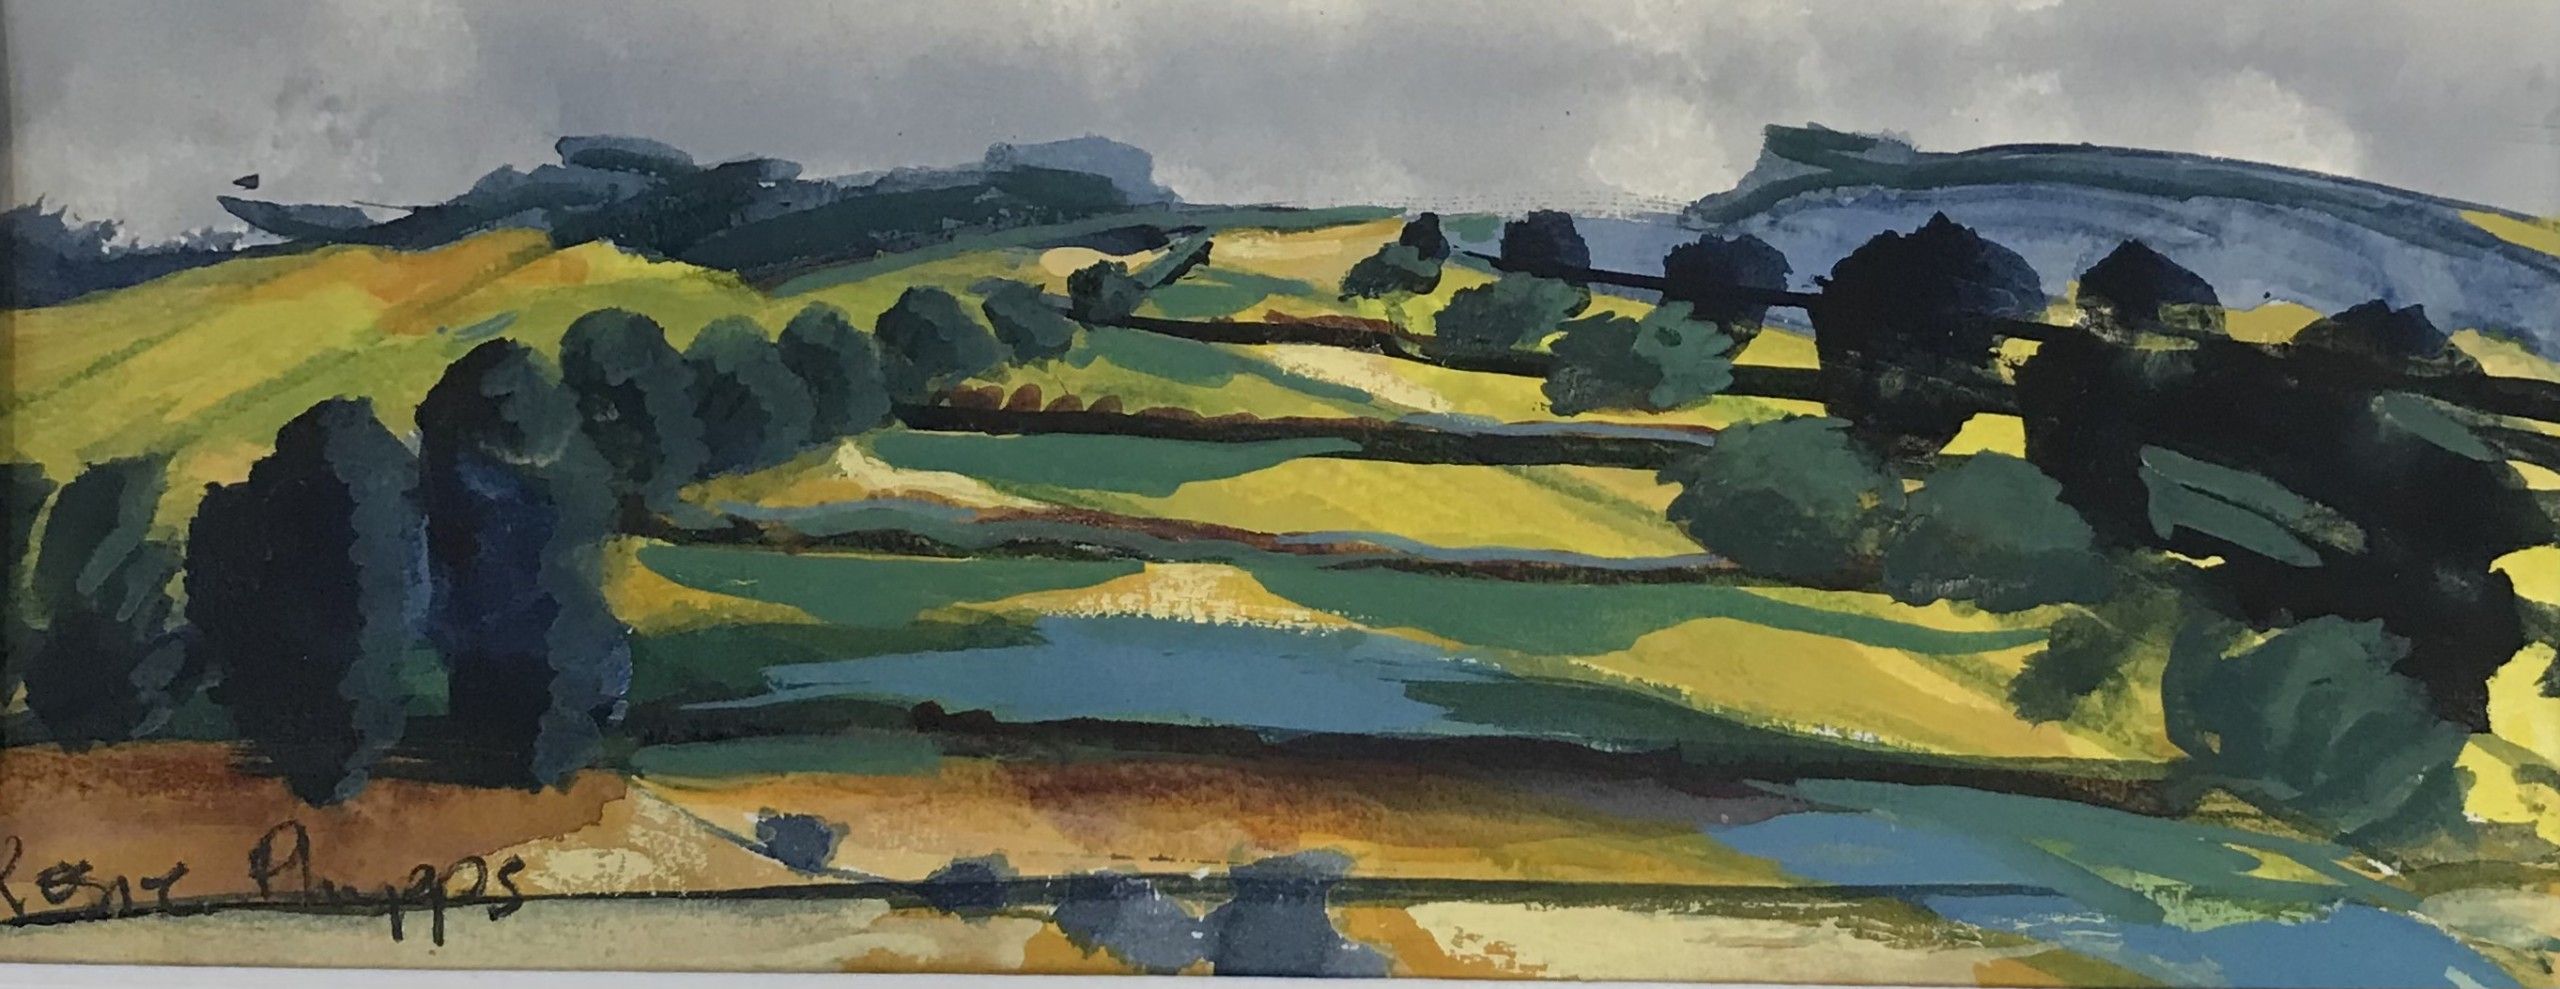 Patchwork Yellow Fields by Rosie Phipps